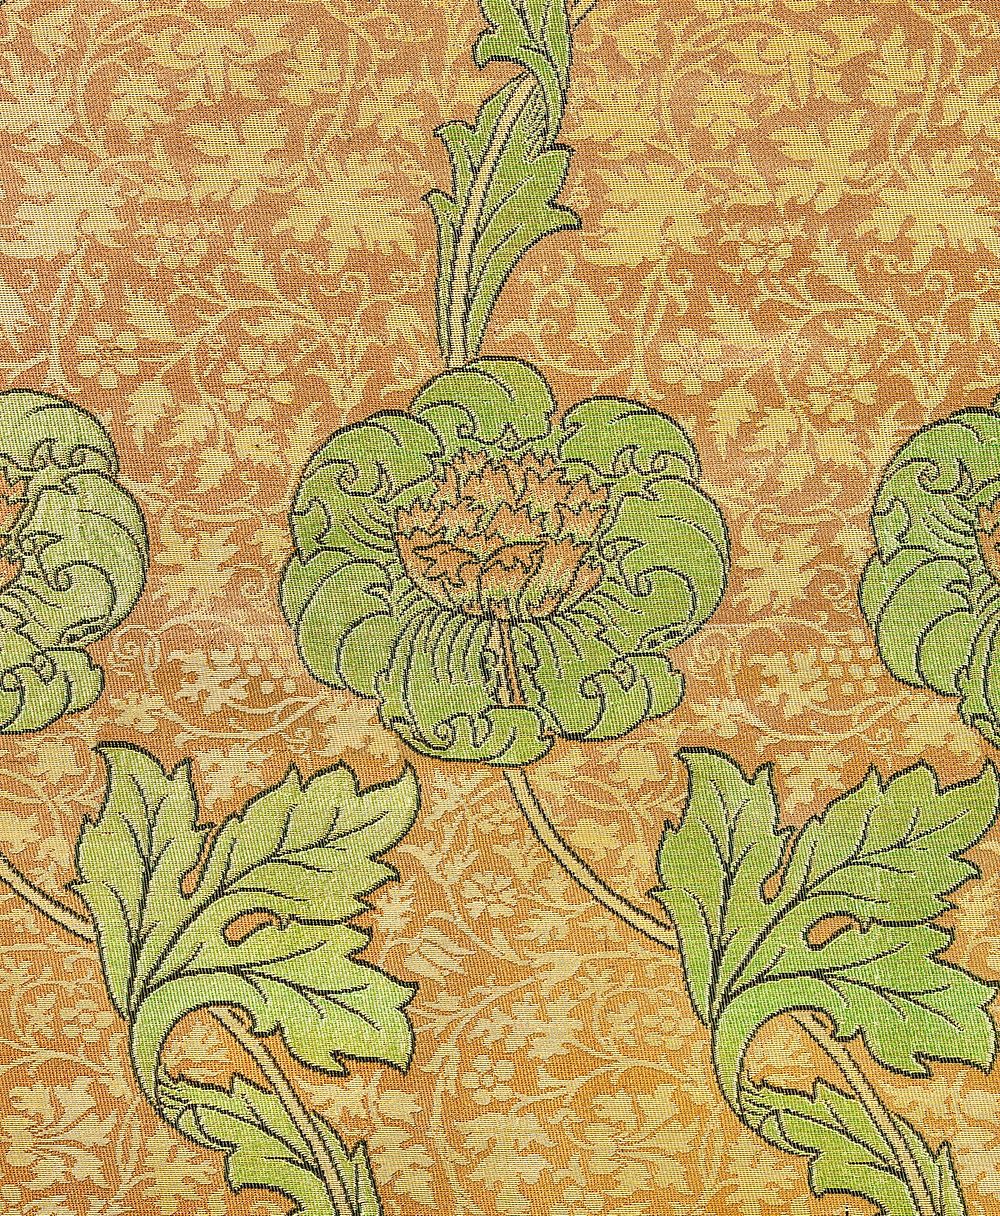 William Morris's (1834-1896) Kennet famous pattern. Original from The MET Museum. Digitally enhanced by rawpixel.